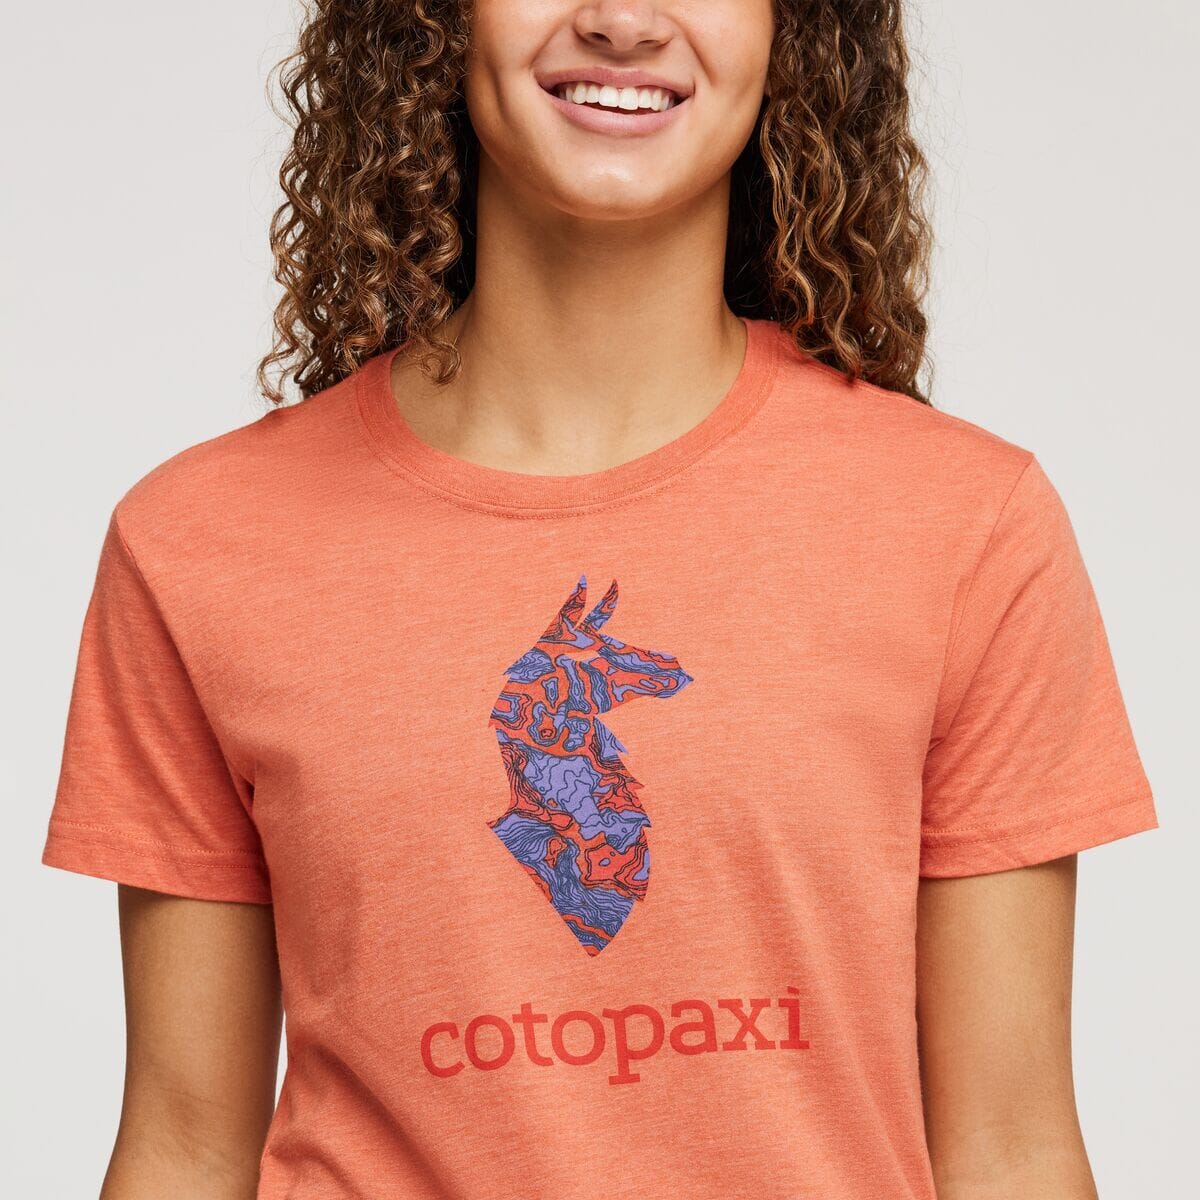 Cotopaxi - W's Altitude Llama Organic T-Shirt - Organic cotton & Recycled polyester - Weekendbee - sustainable sportswear